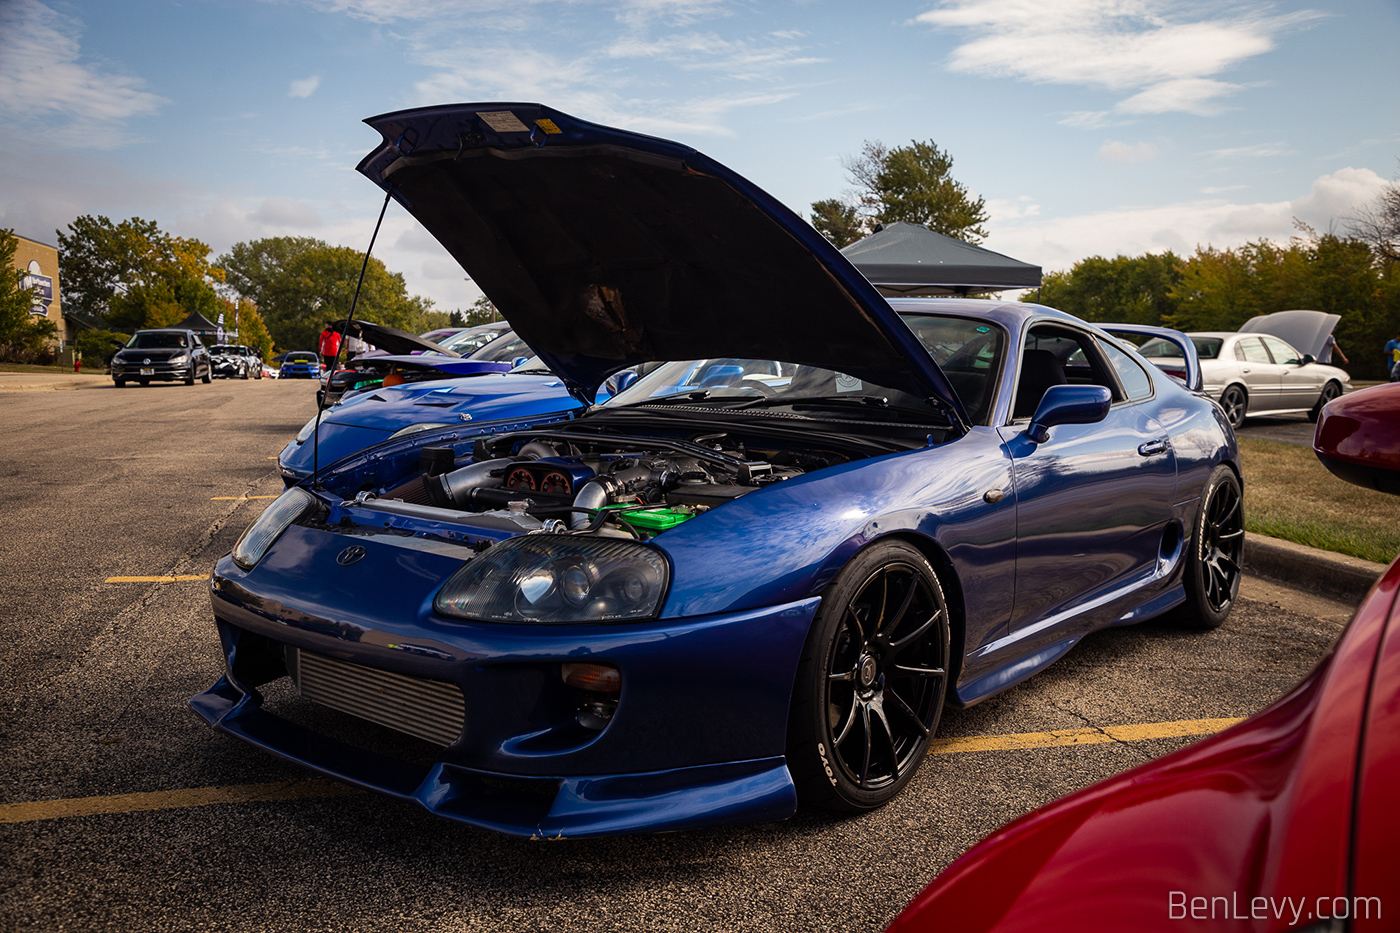 Blue Single Turbo Supra at Stance Down Low Meet